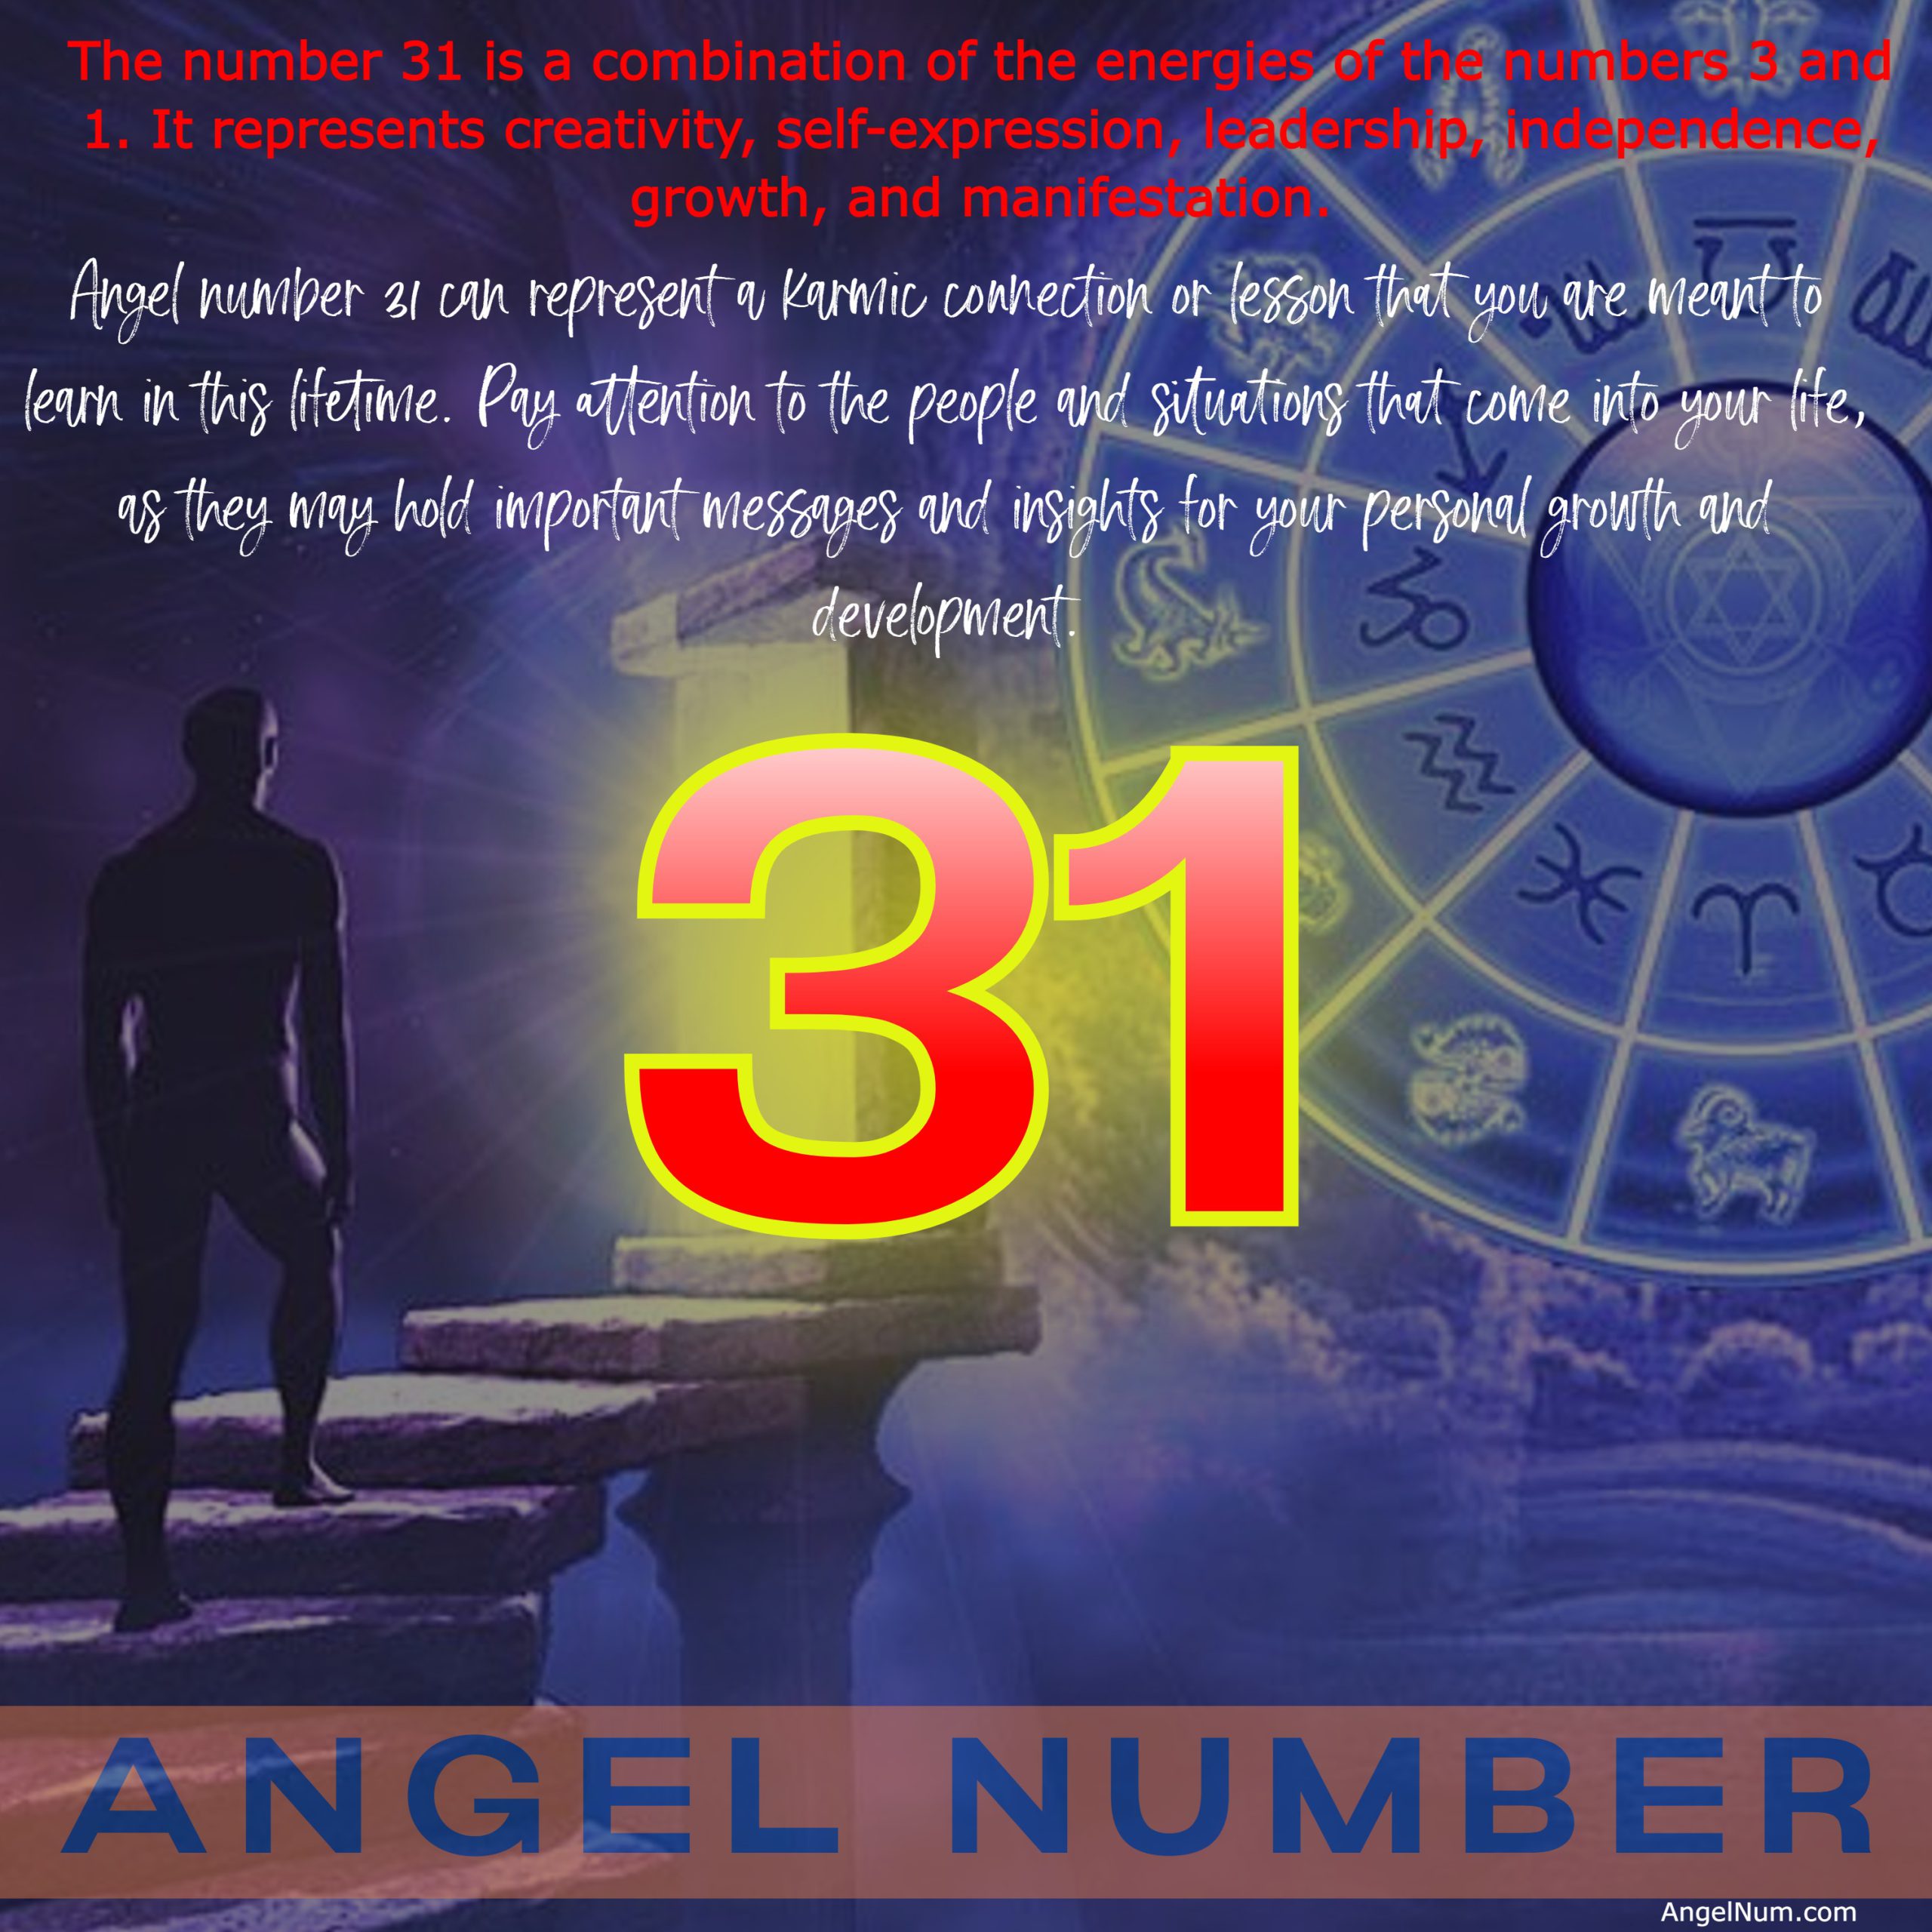 Understanding the Meaning of Angel Number 31